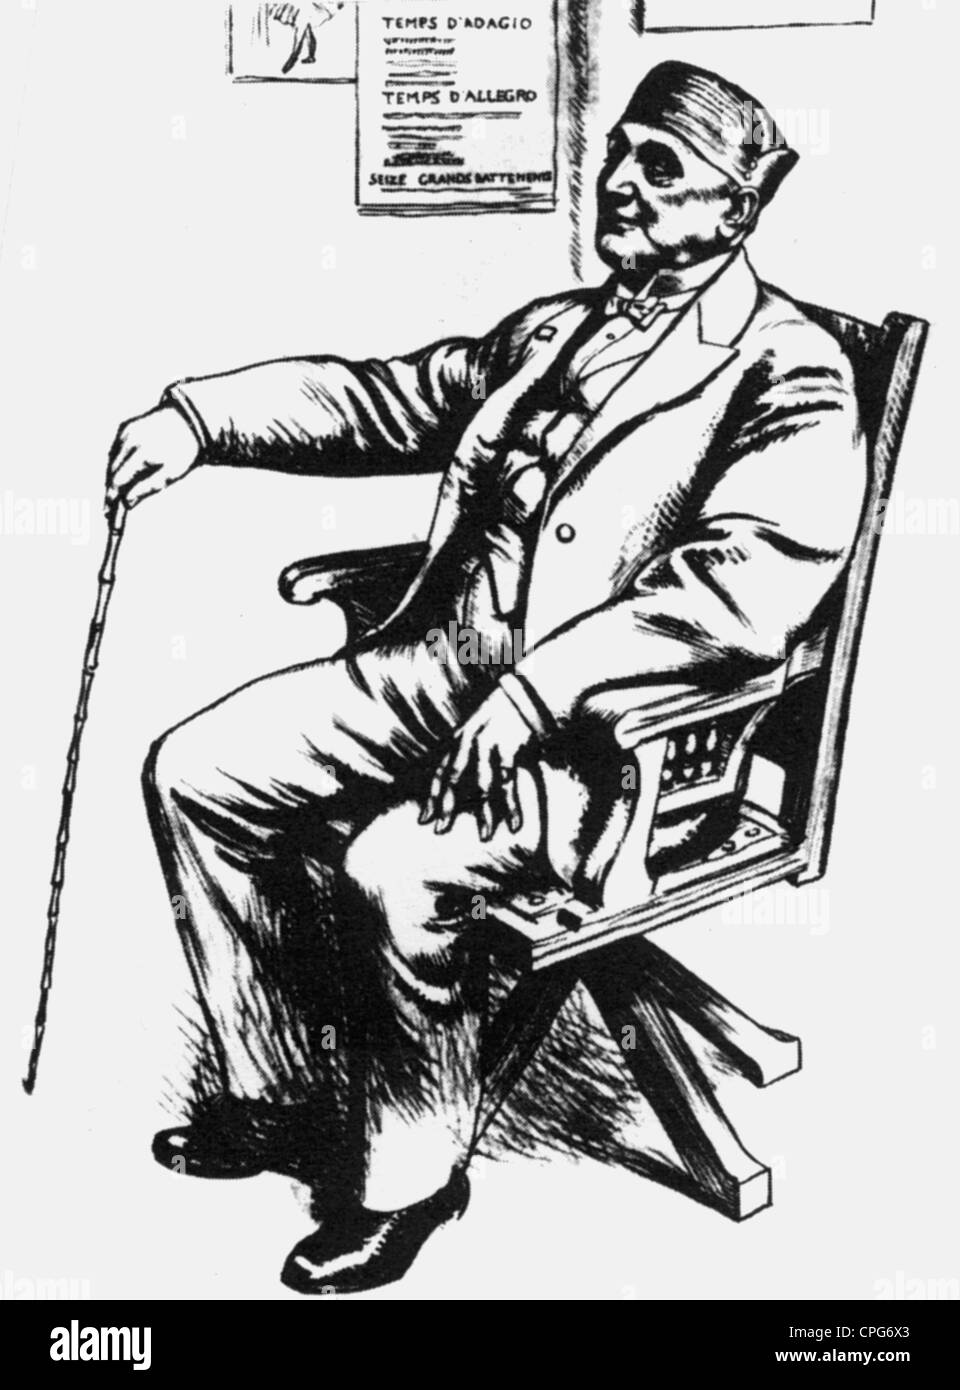 Cecchetti, Enrico, 21.6.1850 - 13.11.1928, Italian dancer, pedagogue, full length, sitting in the chair with cane, sketch, drawing, 20th century, Stock Photo